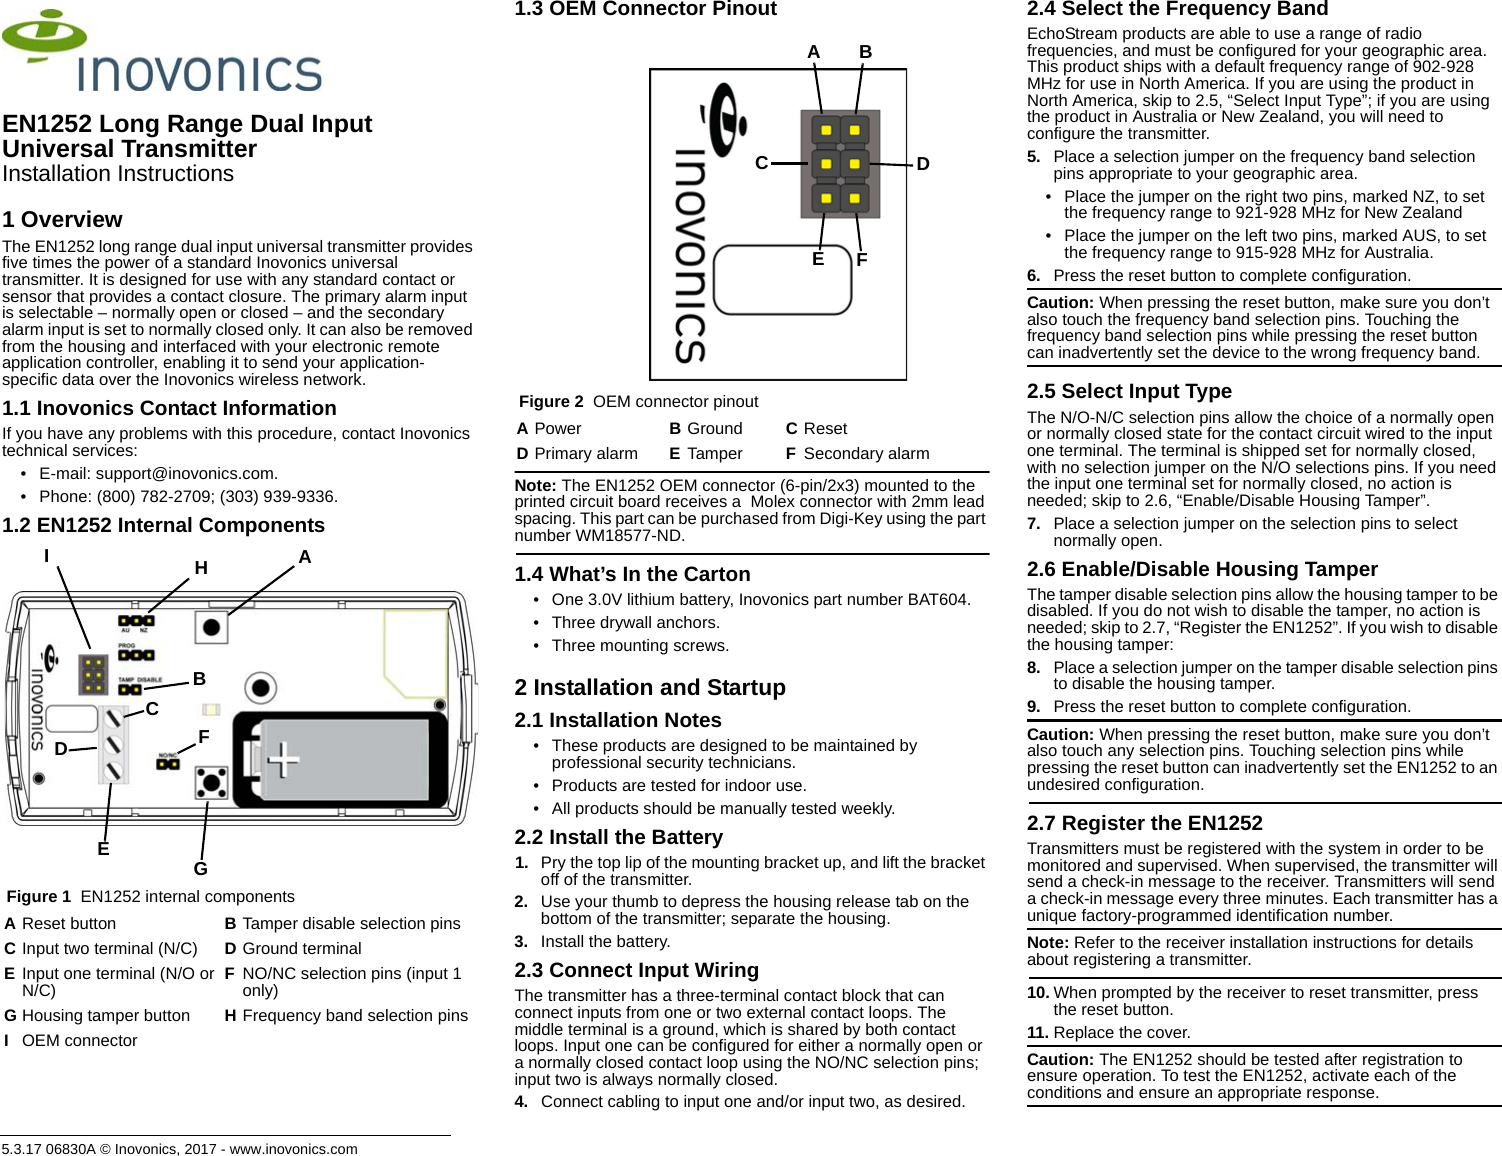 5.3.17 06830A © Inovonics, 2017 - www.inovonics.comEN1252 Long Range Dual Input Universal TransmitterInstallation Instructions1 OverviewThe EN1252 long range dual input universal transmitter provides five times the power of a standard Inovonics universal transmitter. It is designed for use with any standard contact or sensor that provides a contact closure. The primary alarm input is selectable – normally open or closed – and the secondary alarm input is set to normally closed only. It can also be removed from the housing and interfaced with your electronic remote application controller, enabling it to send your application-specific data over the Inovonics wireless network.1.1 Inovonics Contact InformationIf you have any problems with this procedure, contact Inovonics technical services:• E-mail: support@inovonics.com.• Phone: (800) 782-2709; (303) 939-9336.1.2 EN1252 Internal Components Figure 1  EN1252 internal components1.3 OEM Connector Pinout Figure 2  OEM connector pinoutNote: The EN1252 OEM connector (6-pin/2x3) mounted to the printed circuit board receives a  Molex connector with 2mm lead spacing. This part can be purchased from Digi-Key using the part number WM18577-ND.1.4 What’s In the Carton• One 3.0V lithium battery, Inovonics part number BAT604.• Three drywall anchors.• Three mounting screws.2 Installation and Startup2.1 Installation Notes• These products are designed to be maintained by professional security technicians.• Products are tested for indoor use.• All products should be manually tested weekly.2.2 Install the Battery1. Pry the top lip of the mounting bracket up, and lift the bracket off of the transmitter.2. Use your thumb to depress the housing release tab on the bottom of the transmitter; separate the housing.3. Install the battery.2.3 Connect Input WiringThe transmitter has a three-terminal contact block that can connect inputs from one or two external contact loops. The middle terminal is a ground, which is shared by both contact loops. Input one can be configured for either a normally open or a normally closed contact loop using the NO/NC selection pins; input two is always normally closed. 4. Connect cabling to input one and/or input two, as desired. 2.4 Select the Frequency BandEchoStream products are able to use a range of radio frequencies, and must be configured for your geographic area. This product ships with a default frequency range of 902-928 MHz for use in North America. If you are using the product in North America, skip to 2.5, “Select Input Type”; if you are using the product in Australia or New Zealand, you will need to configure the transmitter.5. Place a selection jumper on the frequency band selection pins appropriate to your geographic area.• Place the jumper on the right two pins, marked NZ, to set the frequency range to 921-928 MHz for New Zealand• Place the jumper on the left two pins, marked AUS, to set the frequency range to 915-928 MHz for Australia.6. Press the reset button to complete configuration.Caution: When pressing the reset button, make sure you don’t also touch the frequency band selection pins. Touching the frequency band selection pins while pressing the reset button can inadvertently set the device to the wrong frequency band.2.5 Select Input TypeThe N/O-N/C selection pins allow the choice of a normally open or normally closed state for the contact circuit wired to the input one terminal. The terminal is shipped set for normally closed, with no selection jumper on the N/O selections pins. If you need the input one terminal set for normally closed, no action is needed; skip to 2.6, “Enable/Disable Housing Tamper”.7. Place a selection jumper on the selection pins to select normally open.2.6 Enable/Disable Housing TamperThe tamper disable selection pins allow the housing tamper to be disabled. If you do not wish to disable the tamper, no action is needed; skip to 2.7, “Register the EN1252”. If you wish to disable the housing tamper:8. Place a selection jumper on the tamper disable selection pins to disable the housing tamper.9. Press the reset button to complete configuration.Caution: When pressing the reset button, make sure you don’t also touch any selection pins. Touching selection pins while pressing the reset button can inadvertently set the EN1252 to an undesired configuration.2.7 Register the EN1252Transmitters must be registered with the system in order to be monitored and supervised. When supervised, the transmitter will send a check-in message to the receiver. Transmitters will send a check-in message every three minutes. Each transmitter has a unique factory-programmed identification number.Note: Refer to the receiver installation instructions for details about registering a transmitter.10. When prompted by the receiver to reset transmitter, press the reset button.11. Replace the cover.Caution: The EN1252 should be tested after registration to ensure operation. To test the EN1252, activate each of the conditions and ensure an appropriate response.AReset button BTamper disable selection pinsCInput two terminal (N/C) DGround terminalEInput one terminal (N/O or N/C) FNO/NC selection pins (input 1 only)GHousing tamper button HFrequency band selection pinsIOEM connectorADCEFGBHIAPower BGround CResetDPrimary alarm ETamper FSecondary alarmCADBEF